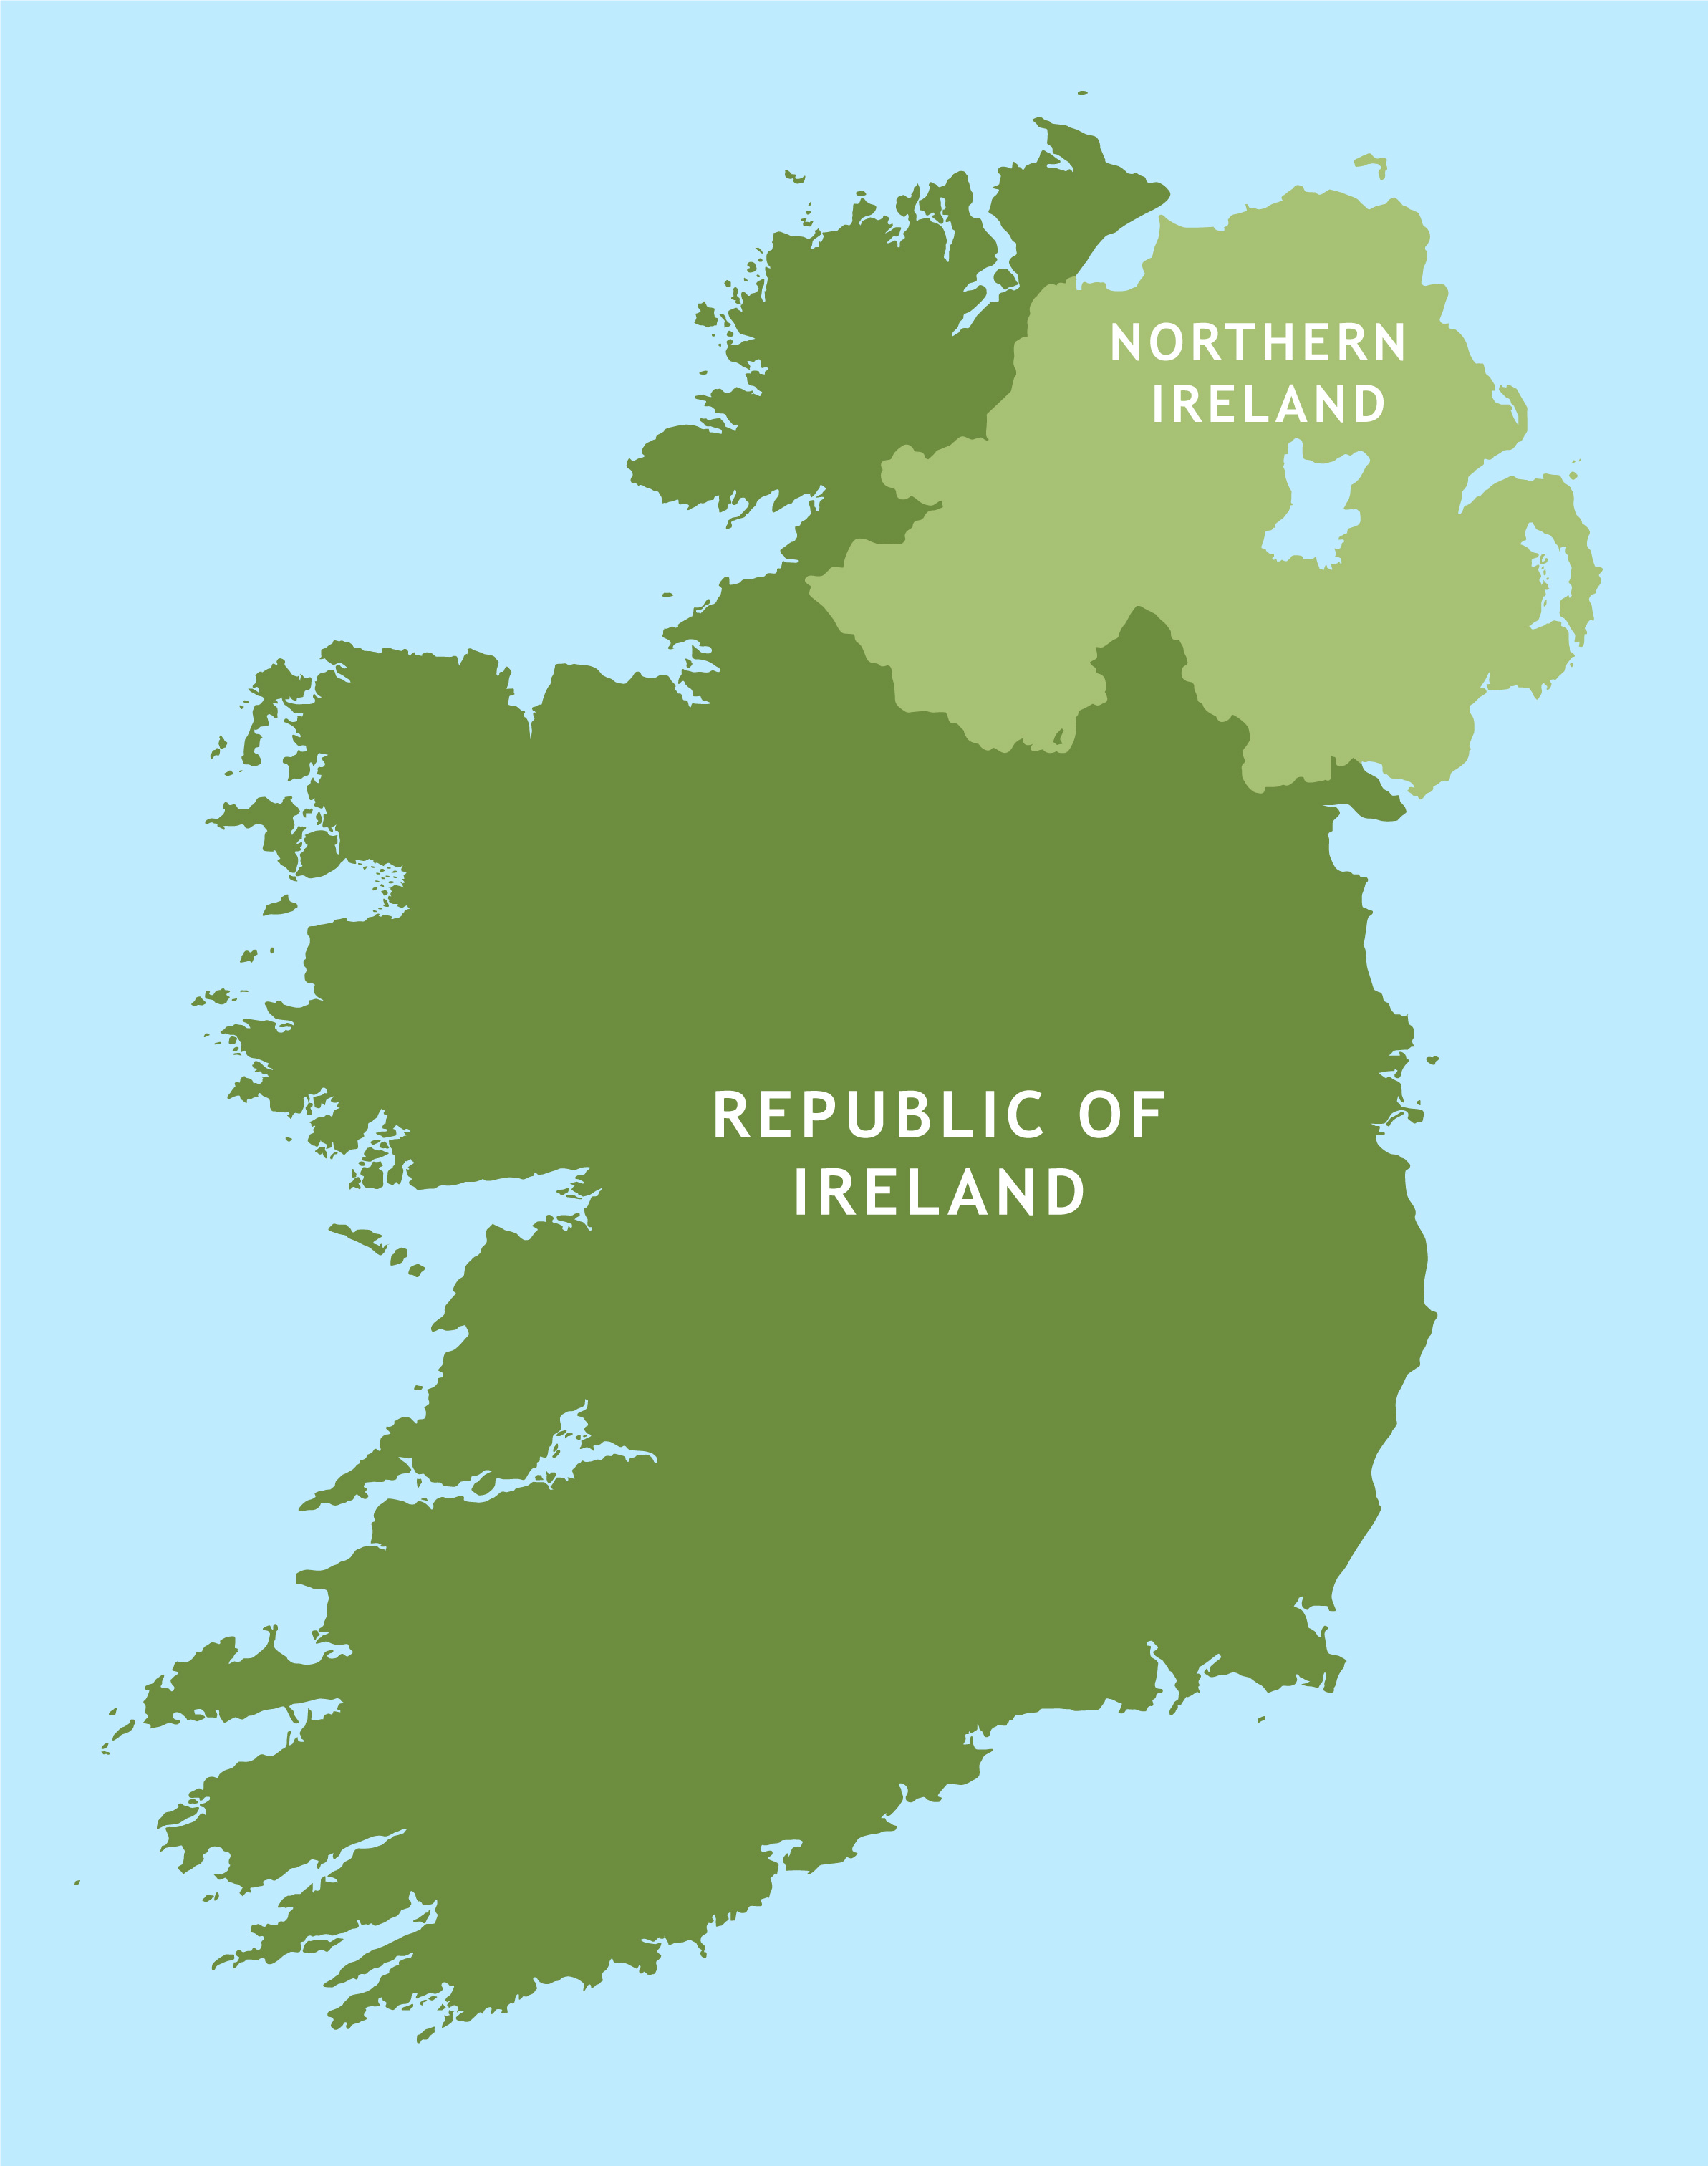 clipart map of uk and ireland - photo #25